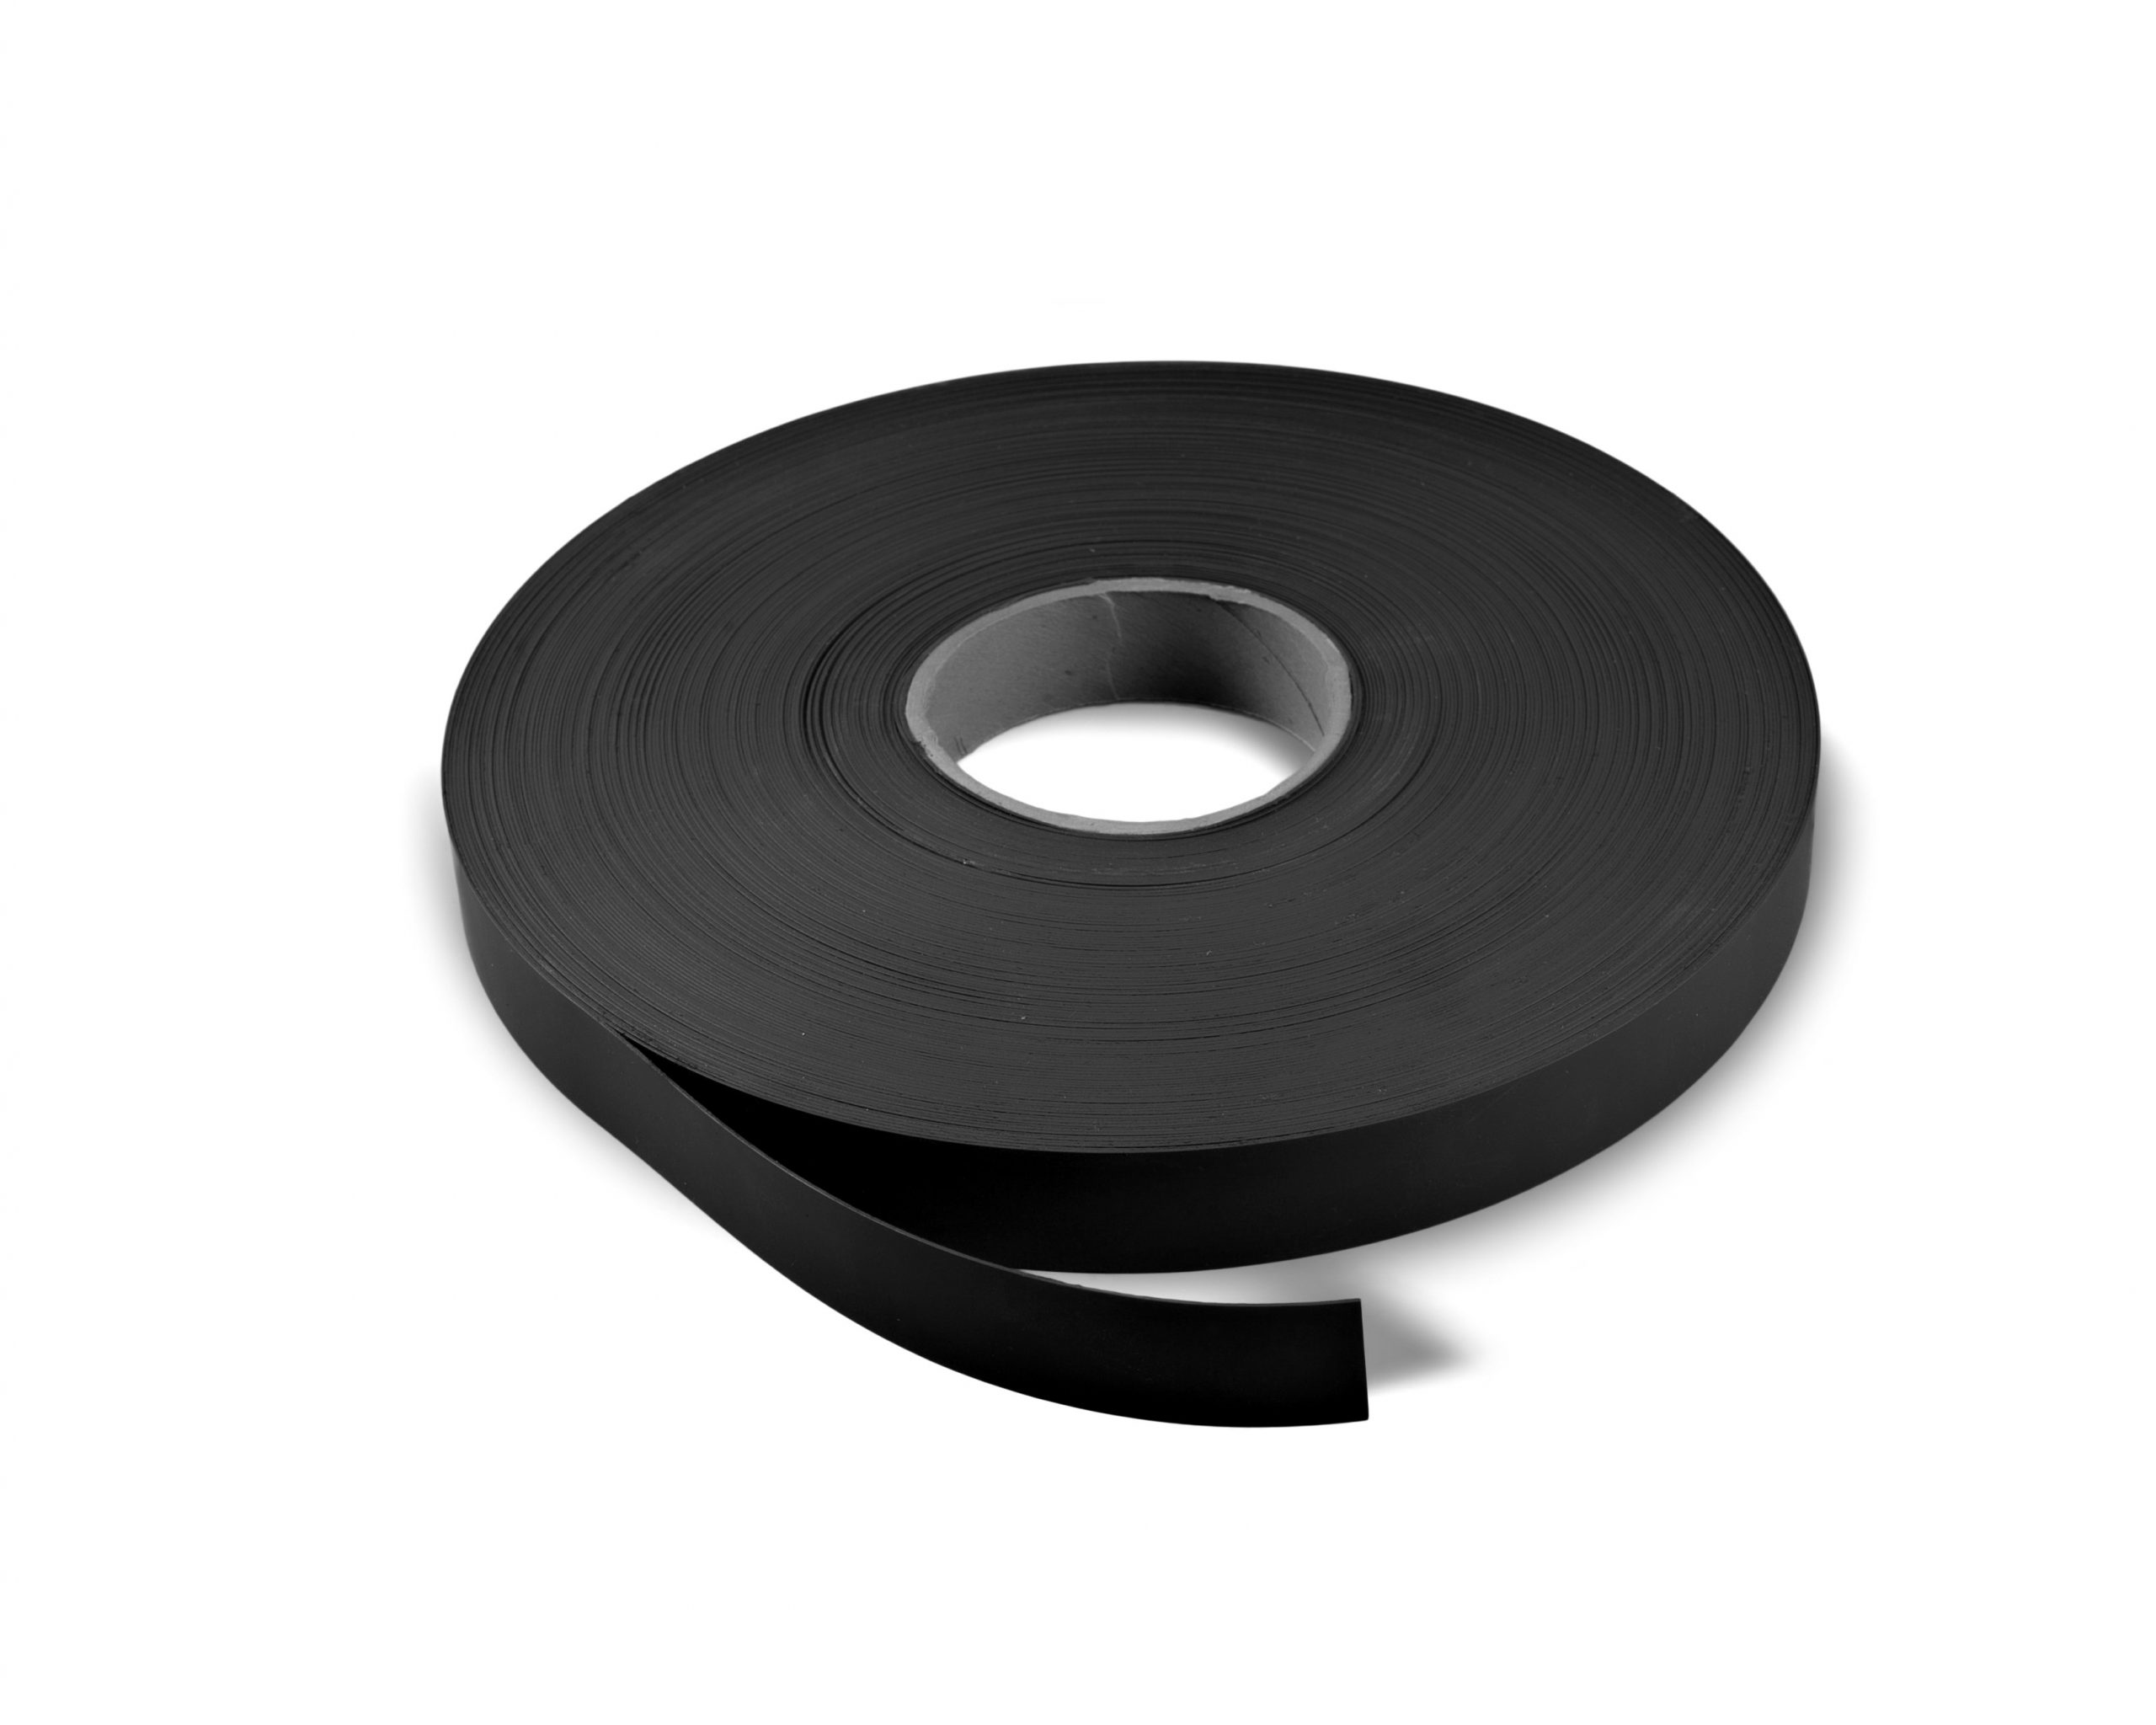 Dowling Magnets Adhesive Magnet Strip 12 x 10 Black Pack Of 6 Rolls -  Office Depot